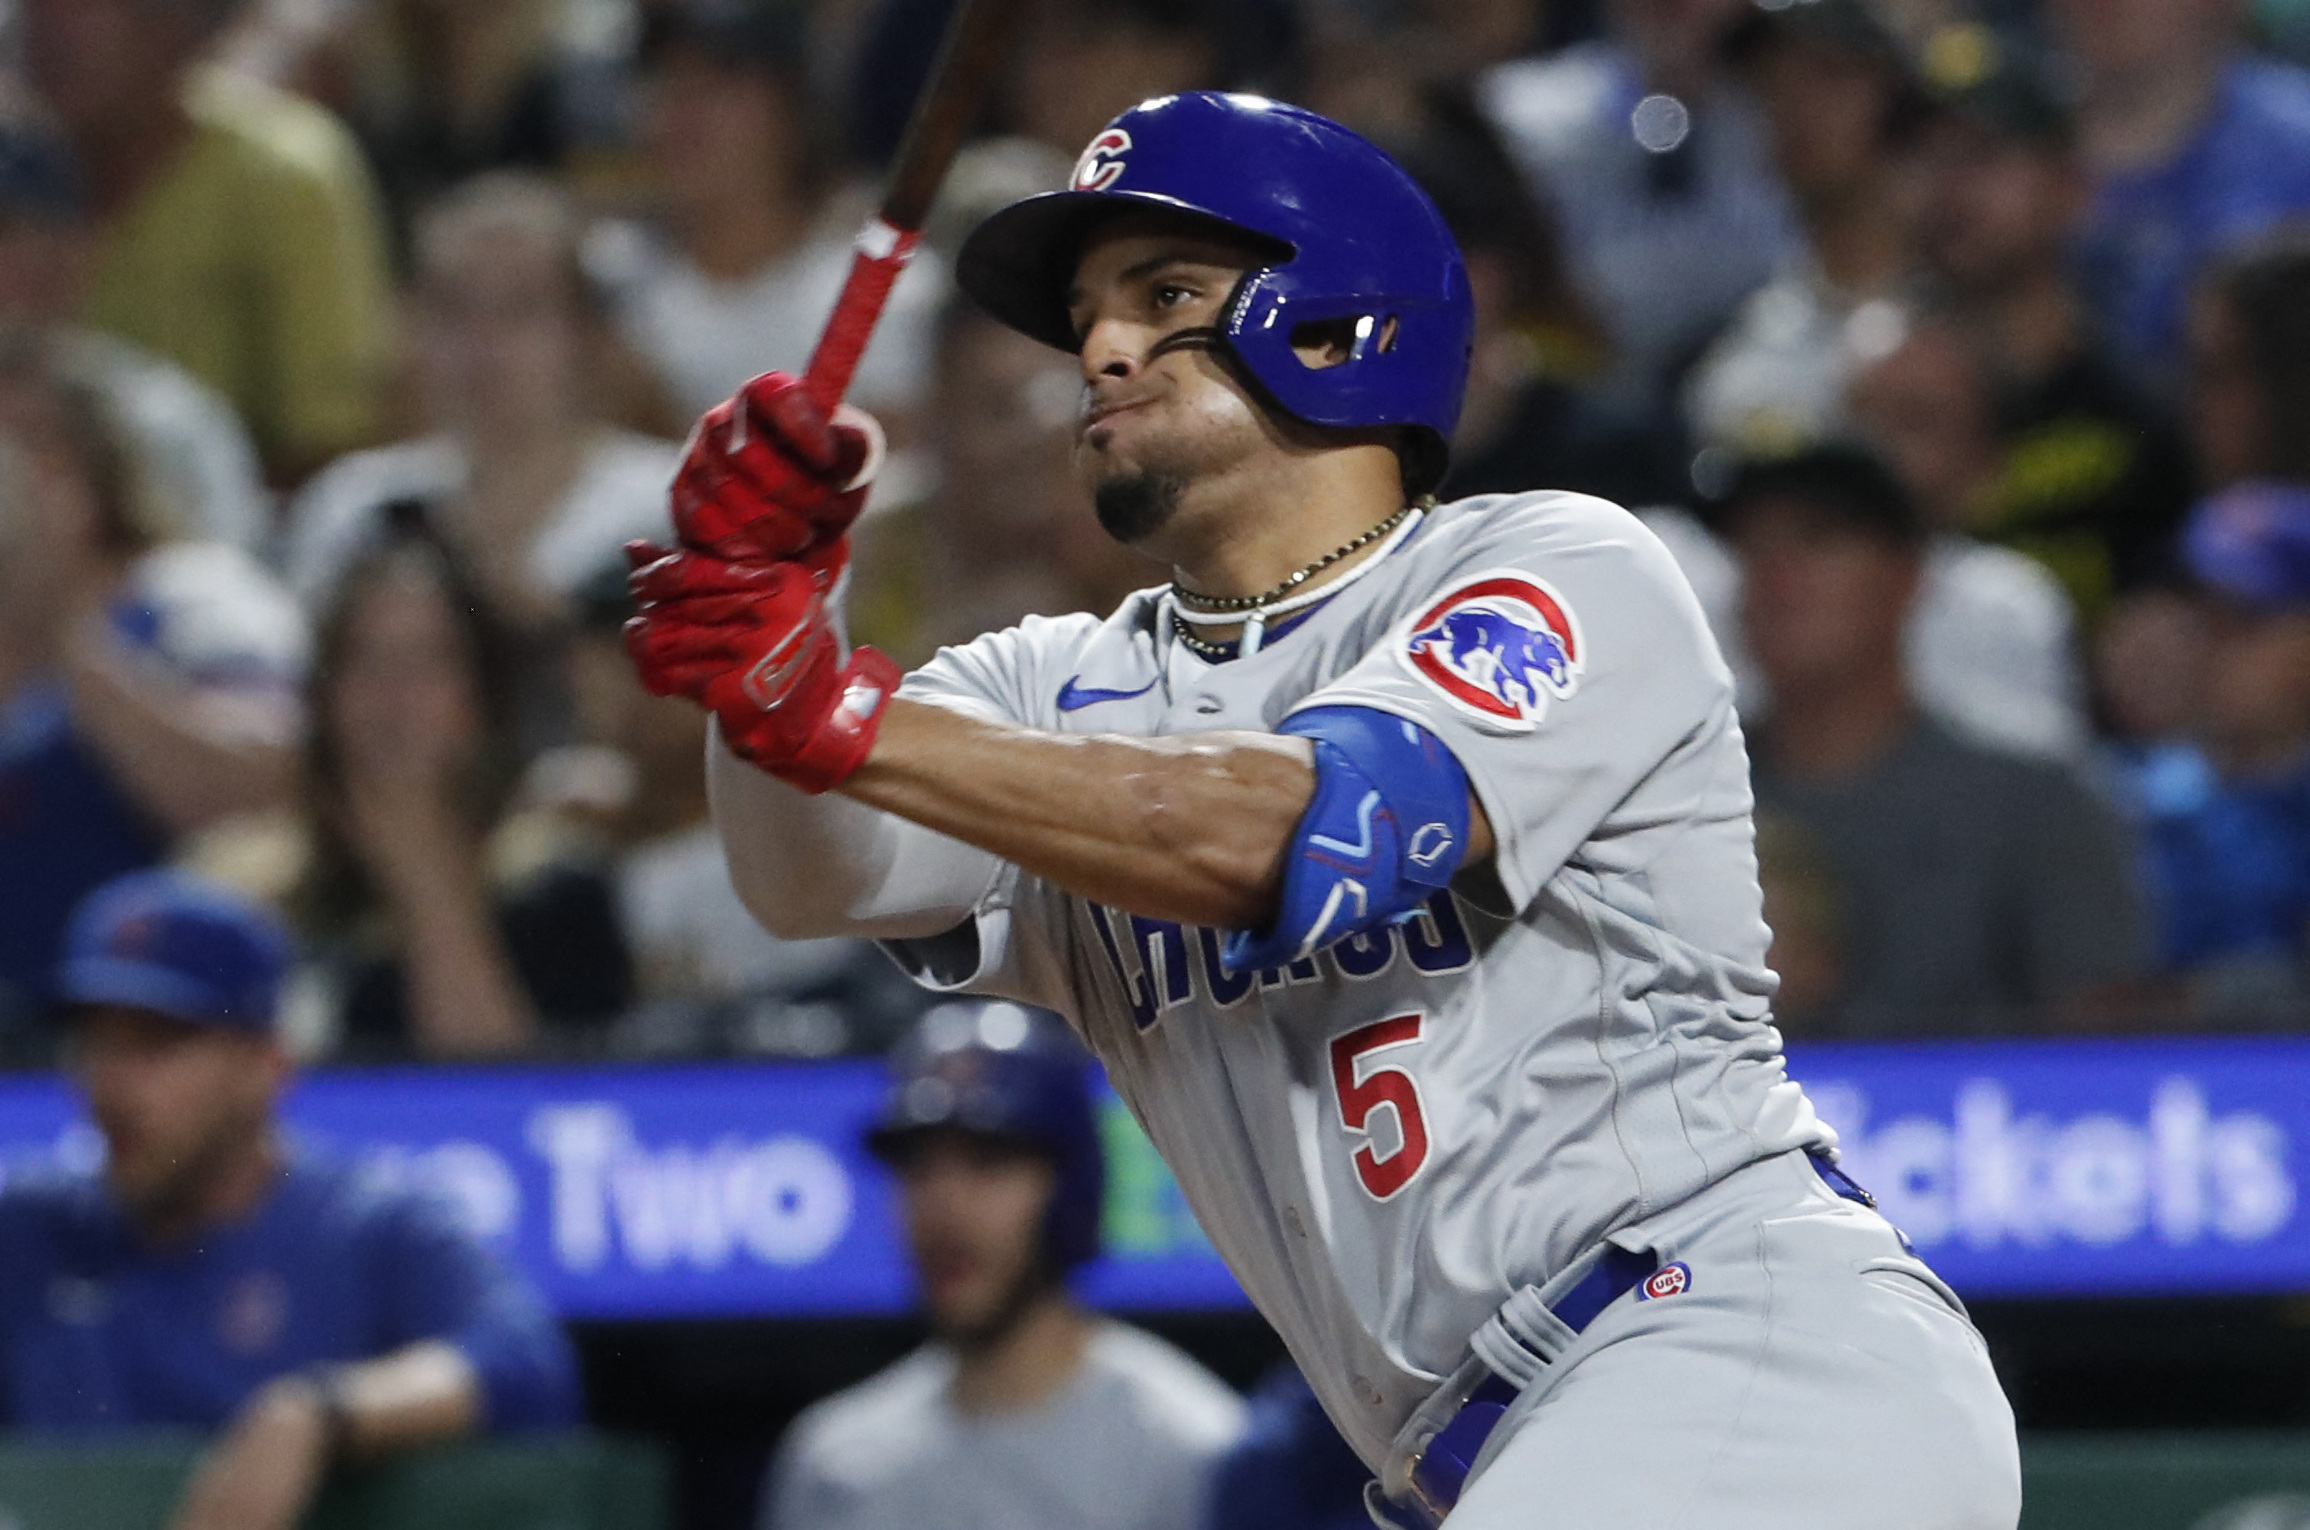 Jordan Wicks allows 2 hits and strikes out 9 in major league debut as Cubs  top Pirates 10-6 - The San Diego Union-Tribune